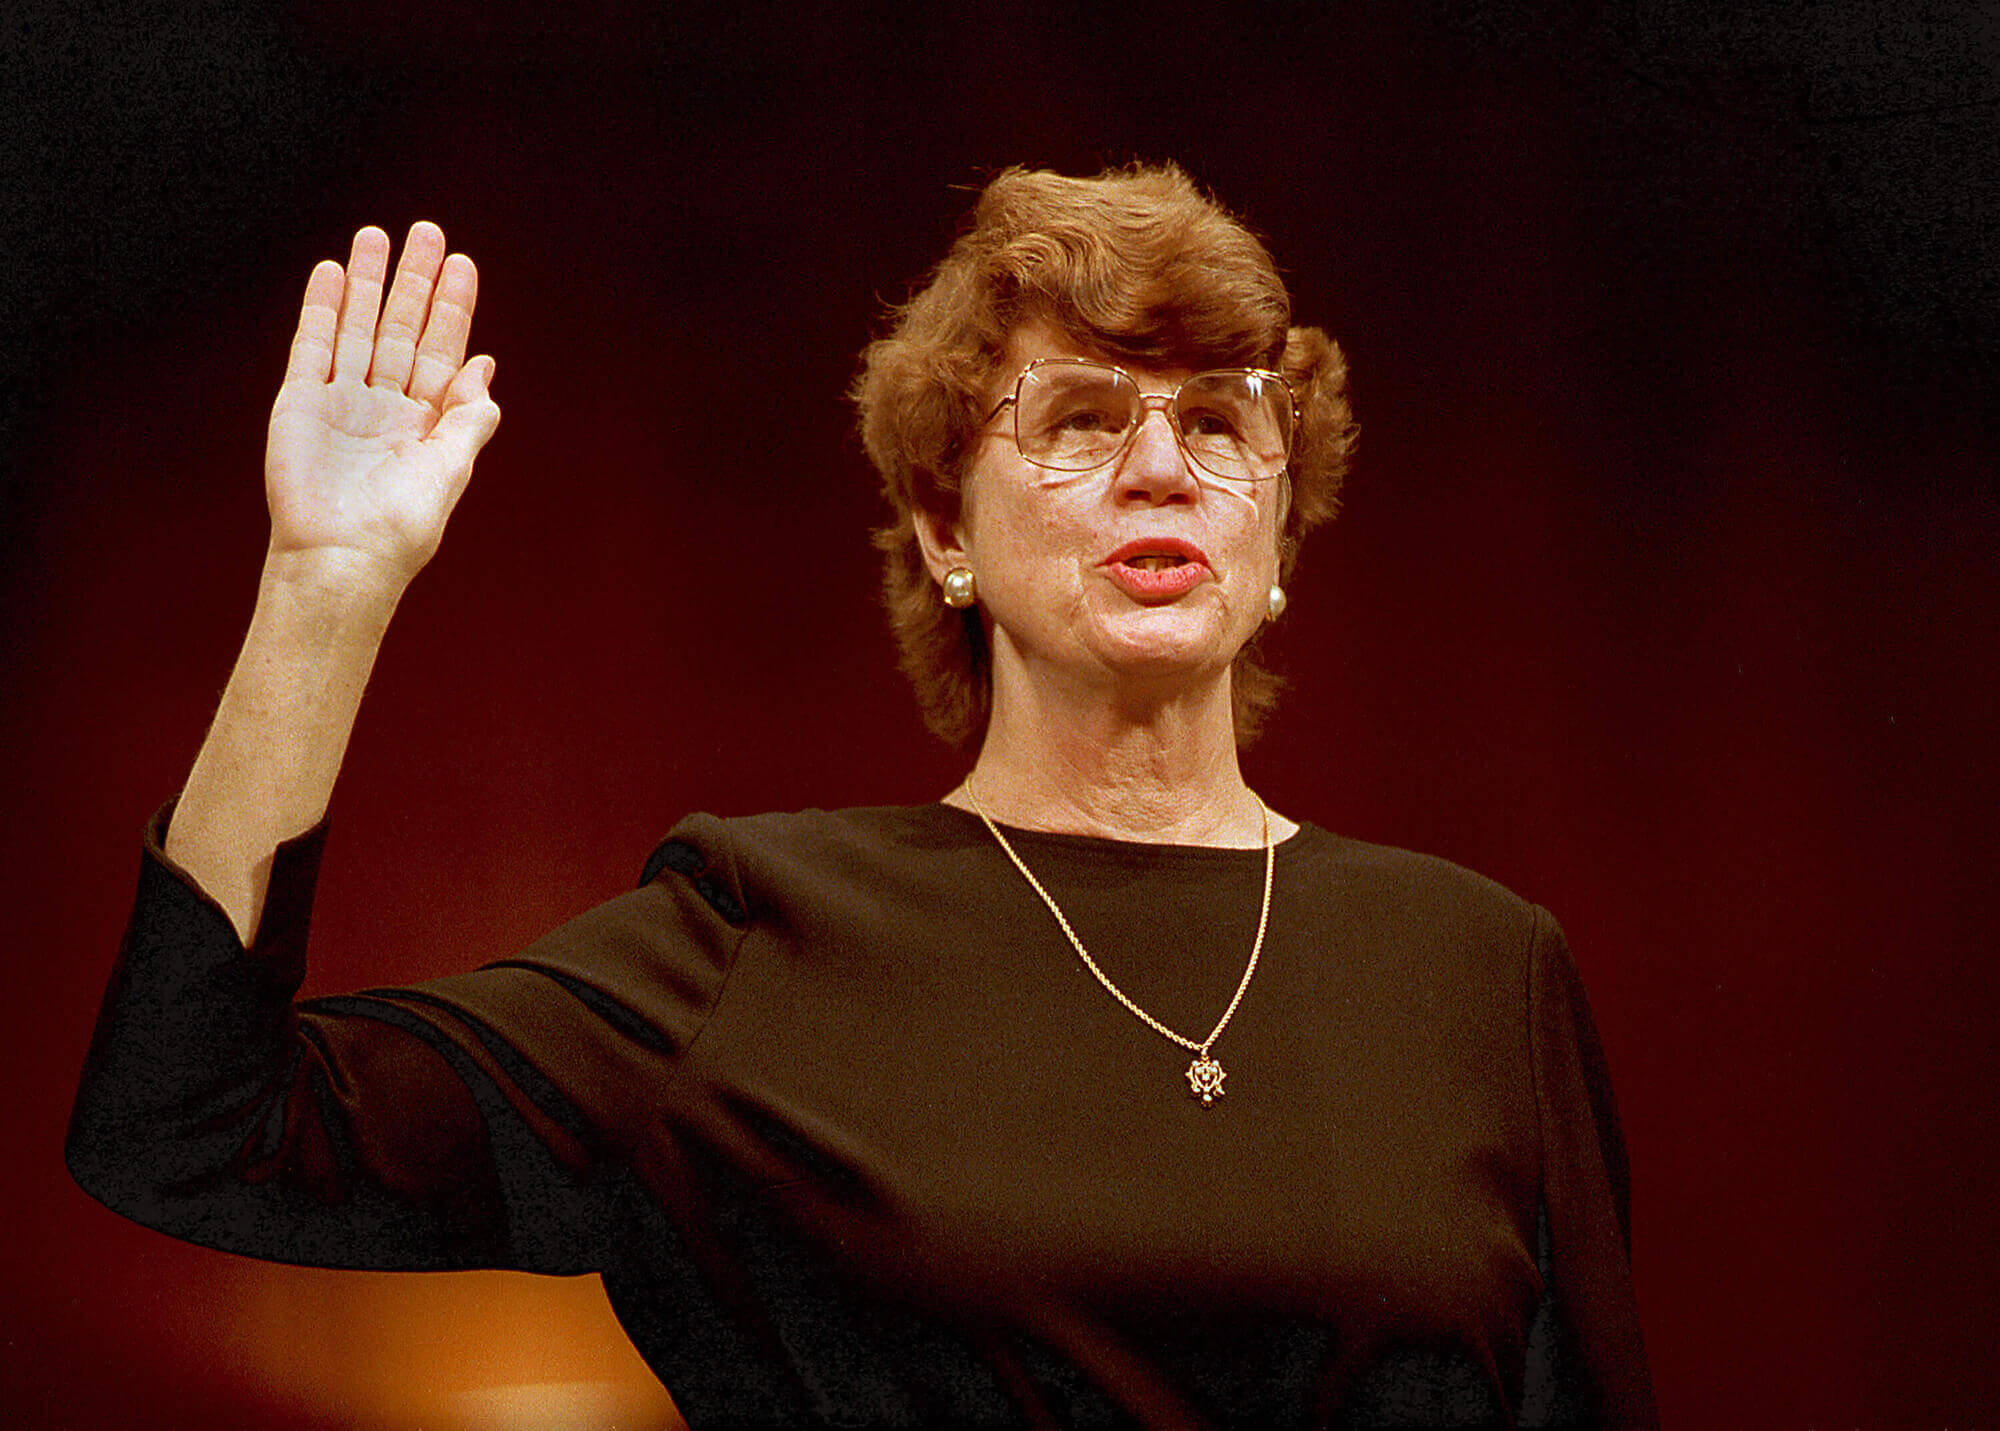 Image of Janet Reno from 1993